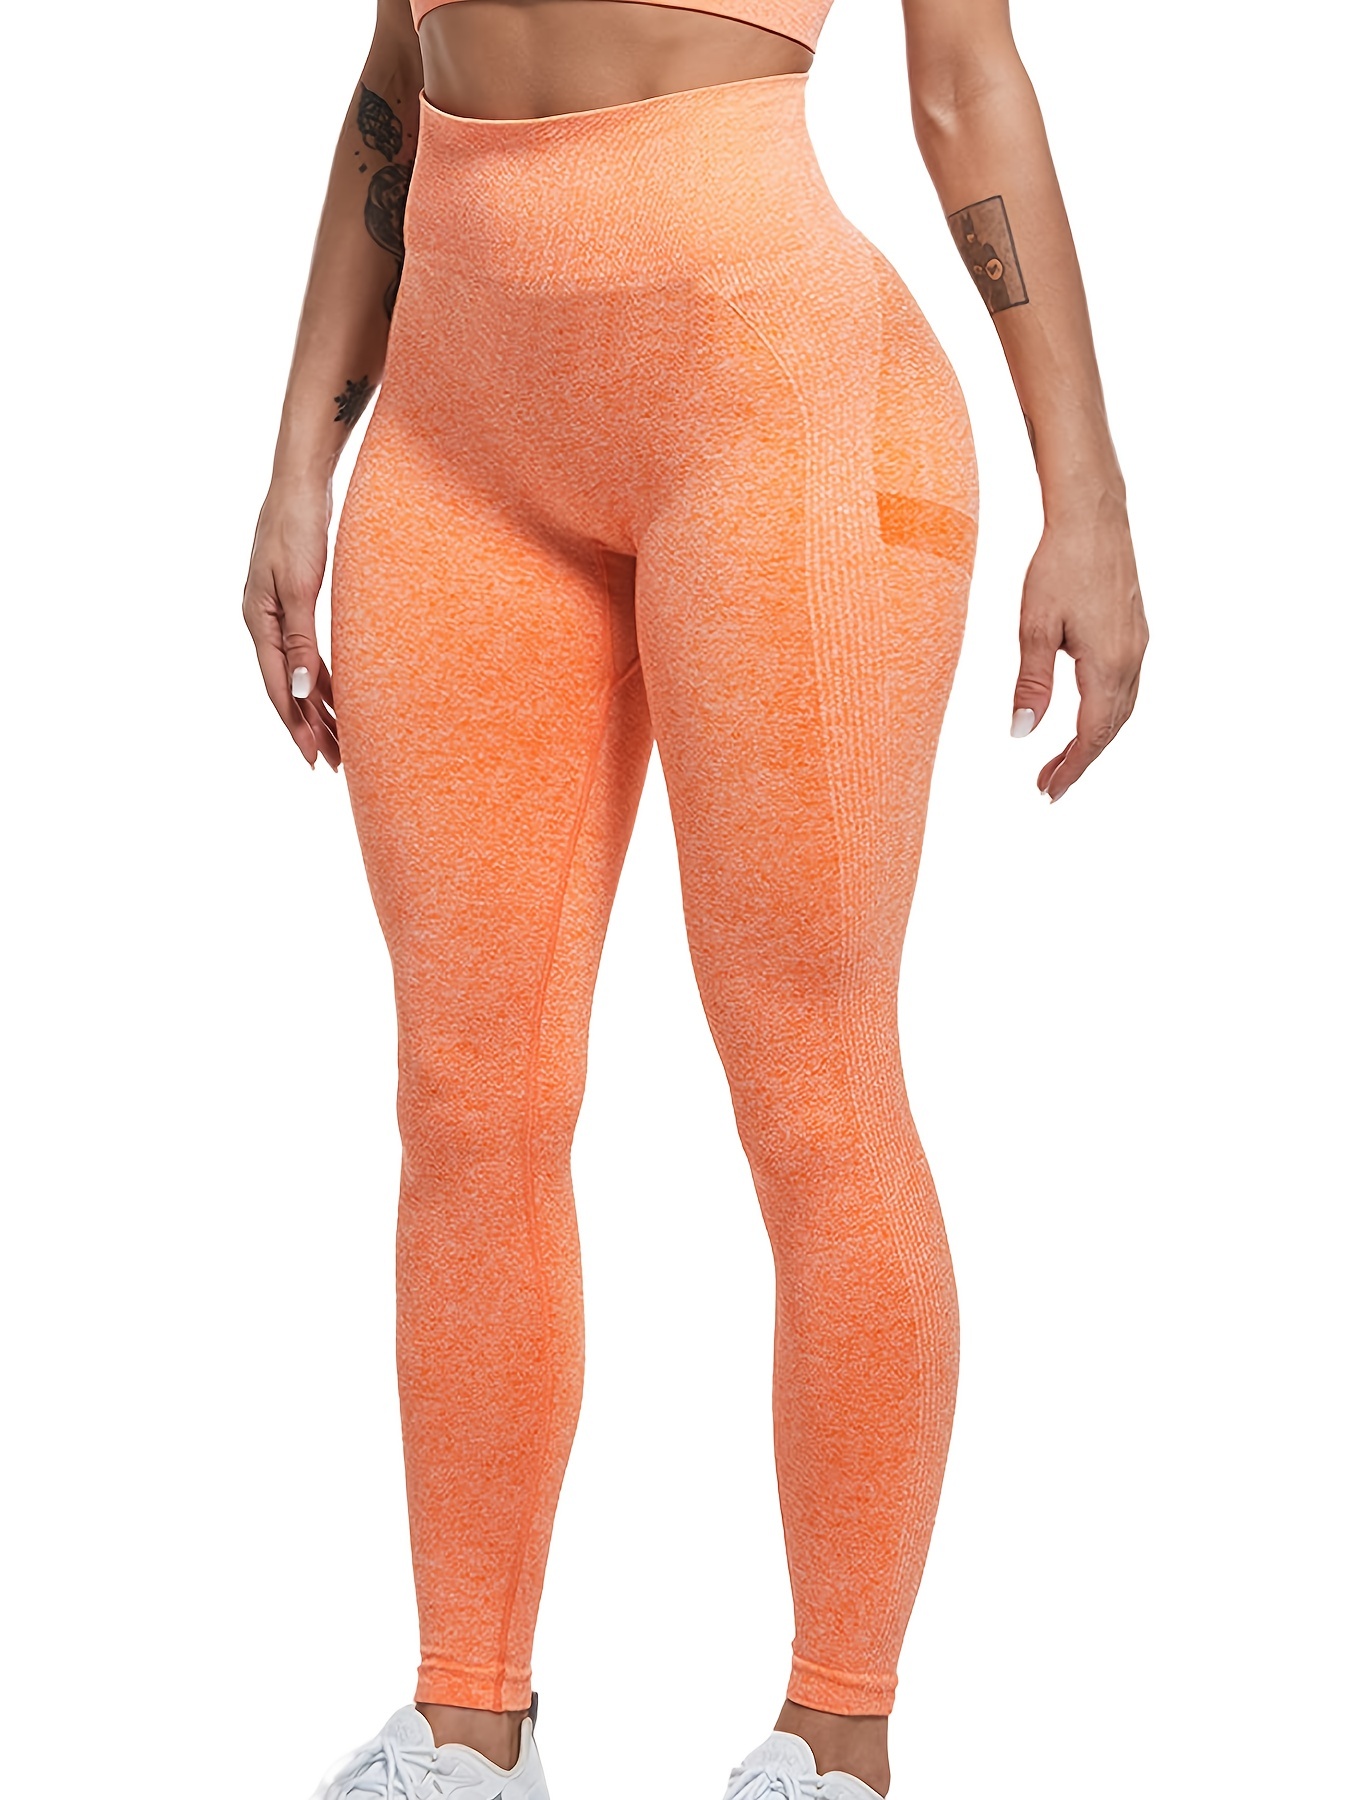 YWDJ Leggings for Women Workout Butt Lifting Gym Long Length High Waist  Running Sports Yogalicious Utility Dressy Everyday Soft Bubble Fitness  Running Hip Lifting Exercise Running Yoga Pants Orange XL 